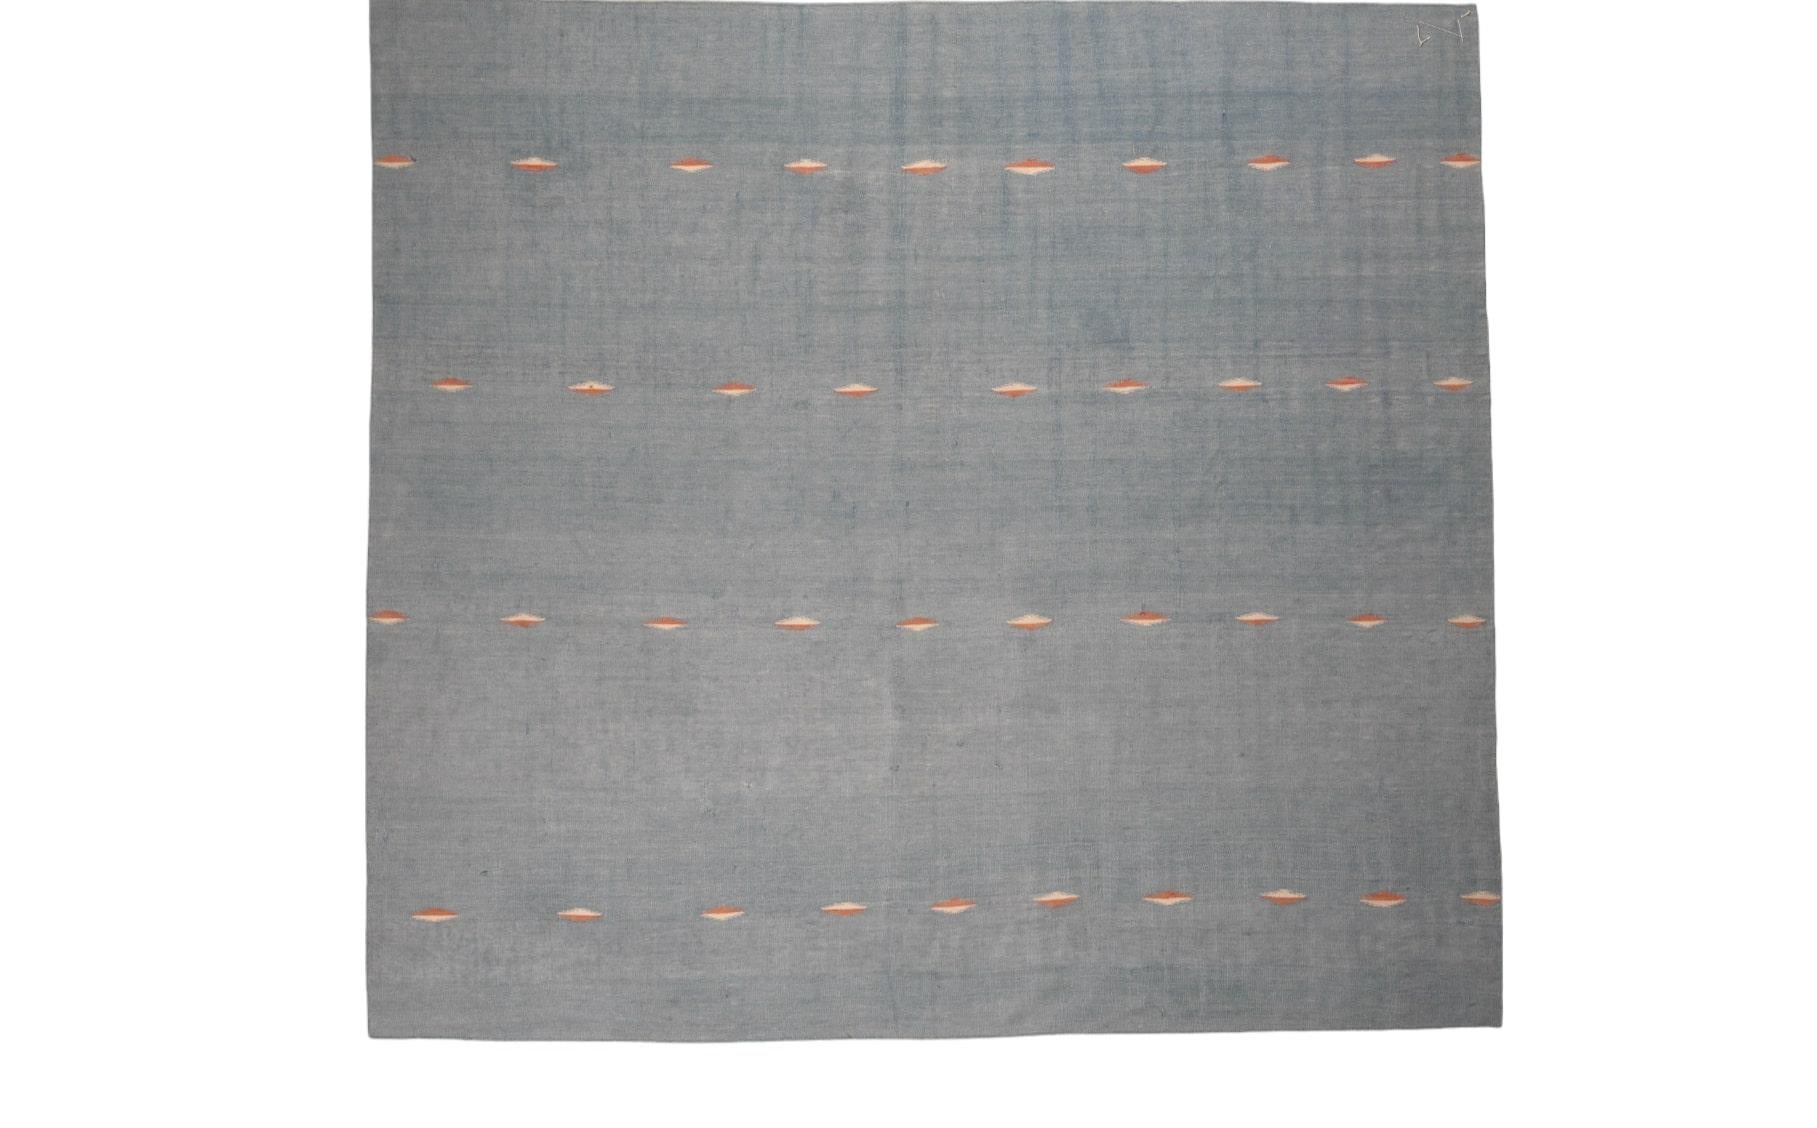 Hand-Woven Vintage Dhurrie Rug in Blue, with Geometric Patterns, from Rug & Kilim For Sale